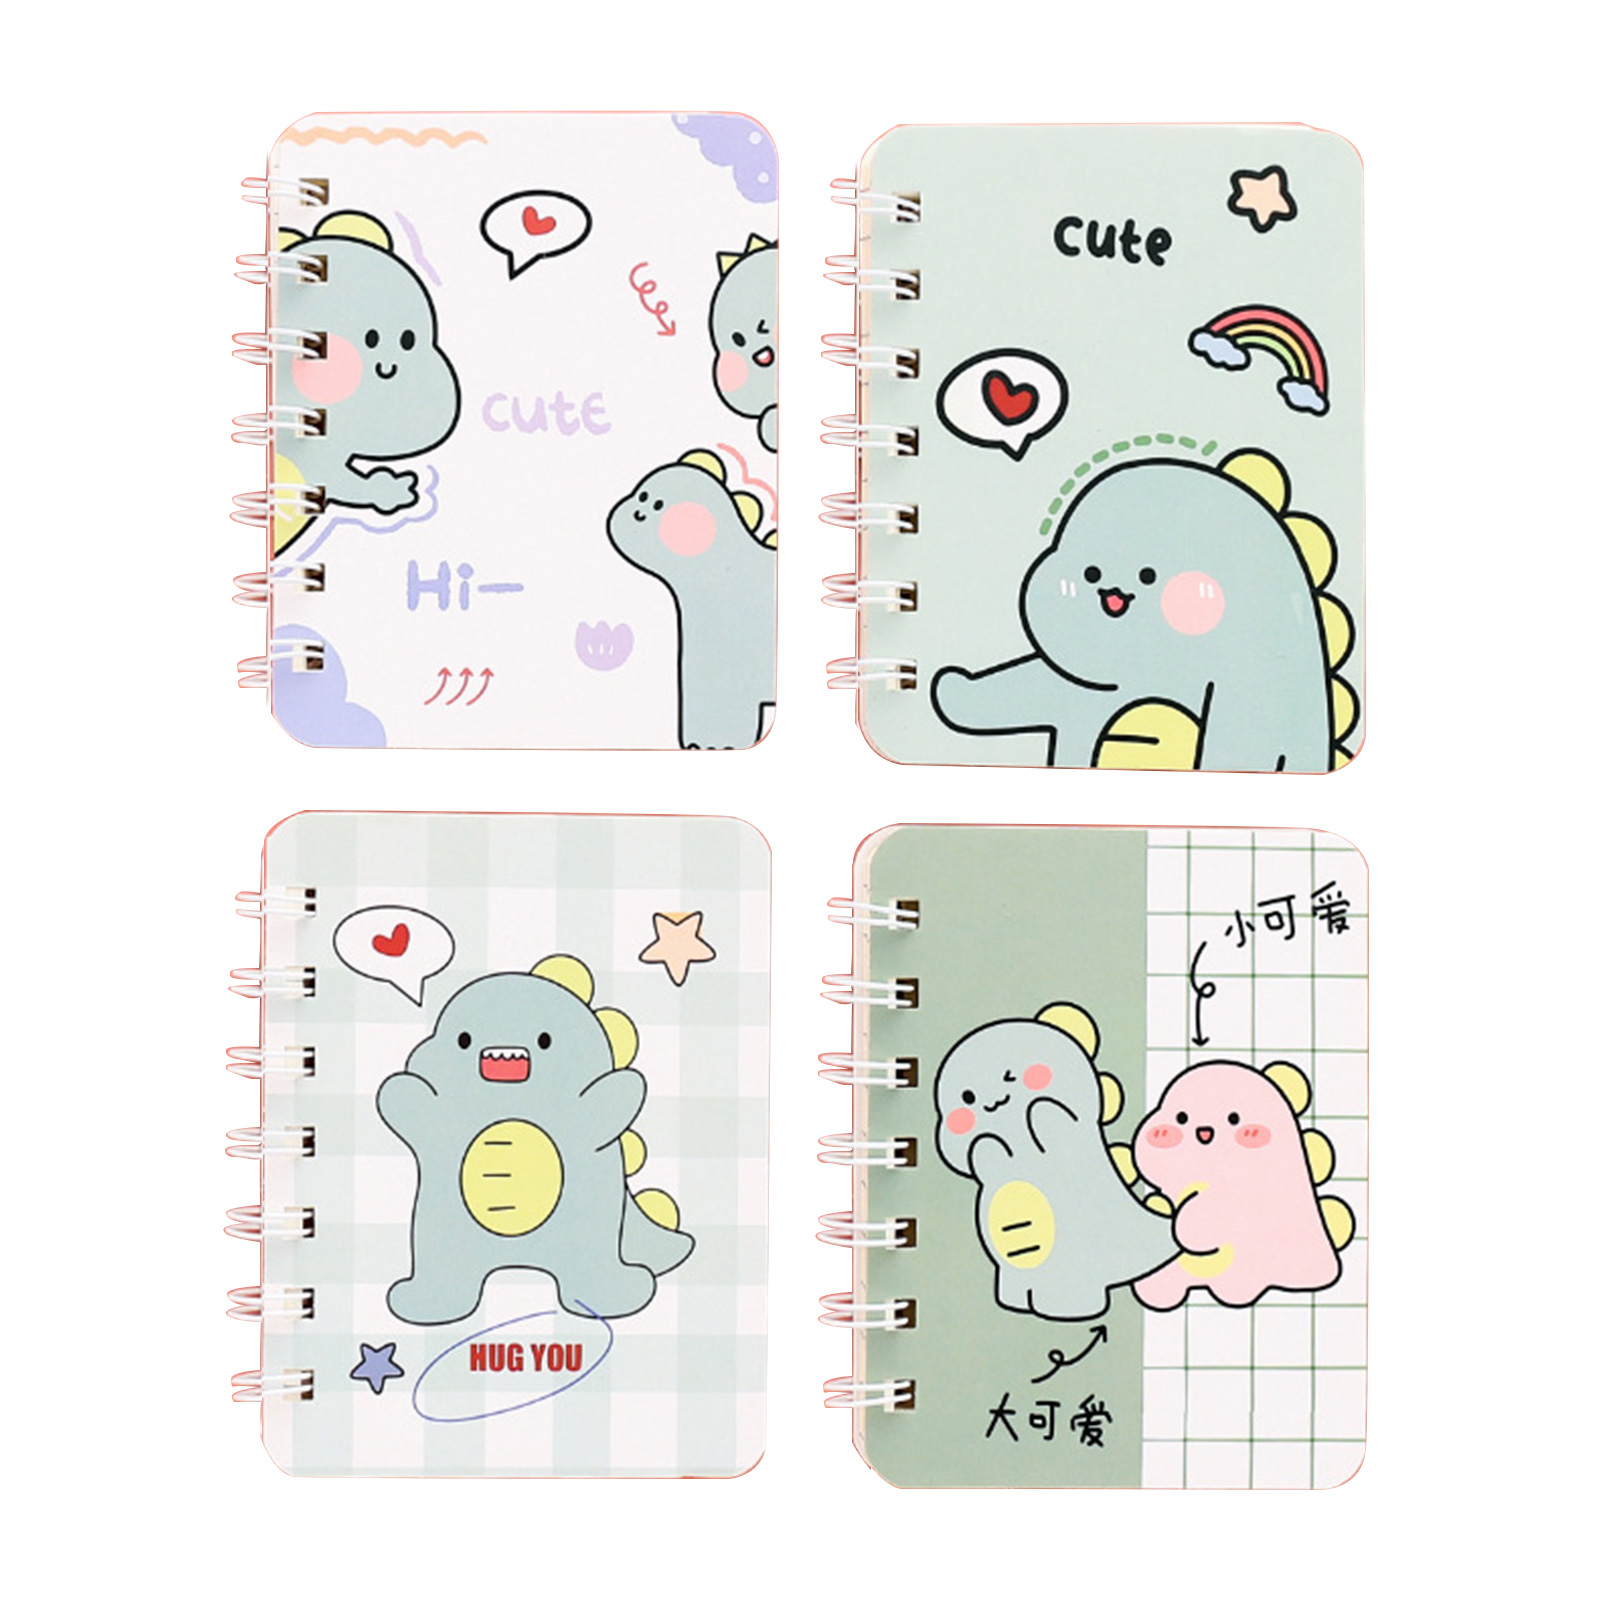 Strawberry Composition Notebooks: Cute Notebooks Blank Wide Lined Workbook For Girls  Boys  Kids  Teens  Students And Teachers Writing Journal Co - 3